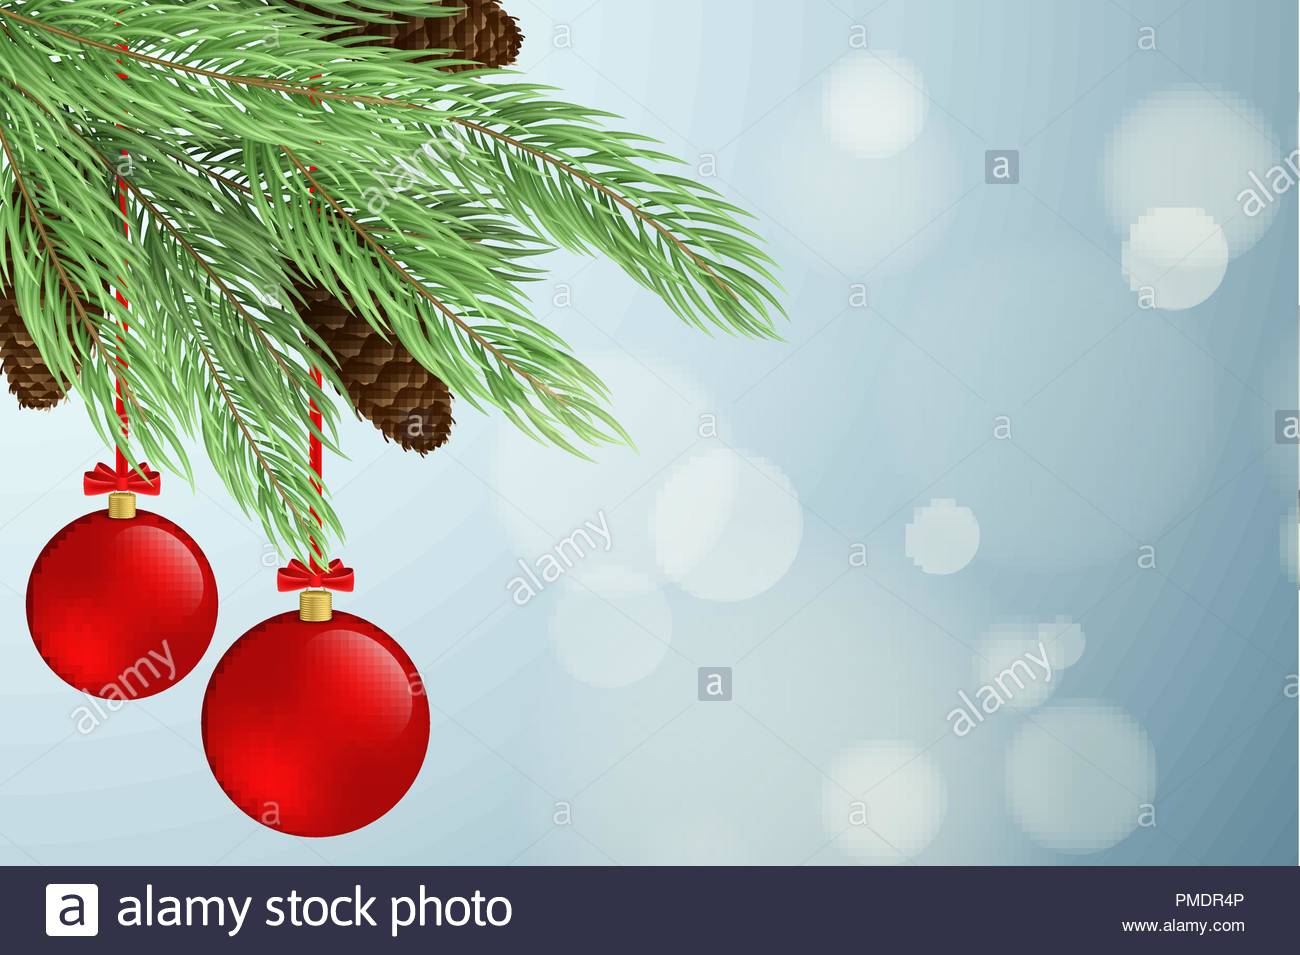 Merry Christmas background Christmas tree with toy balls and